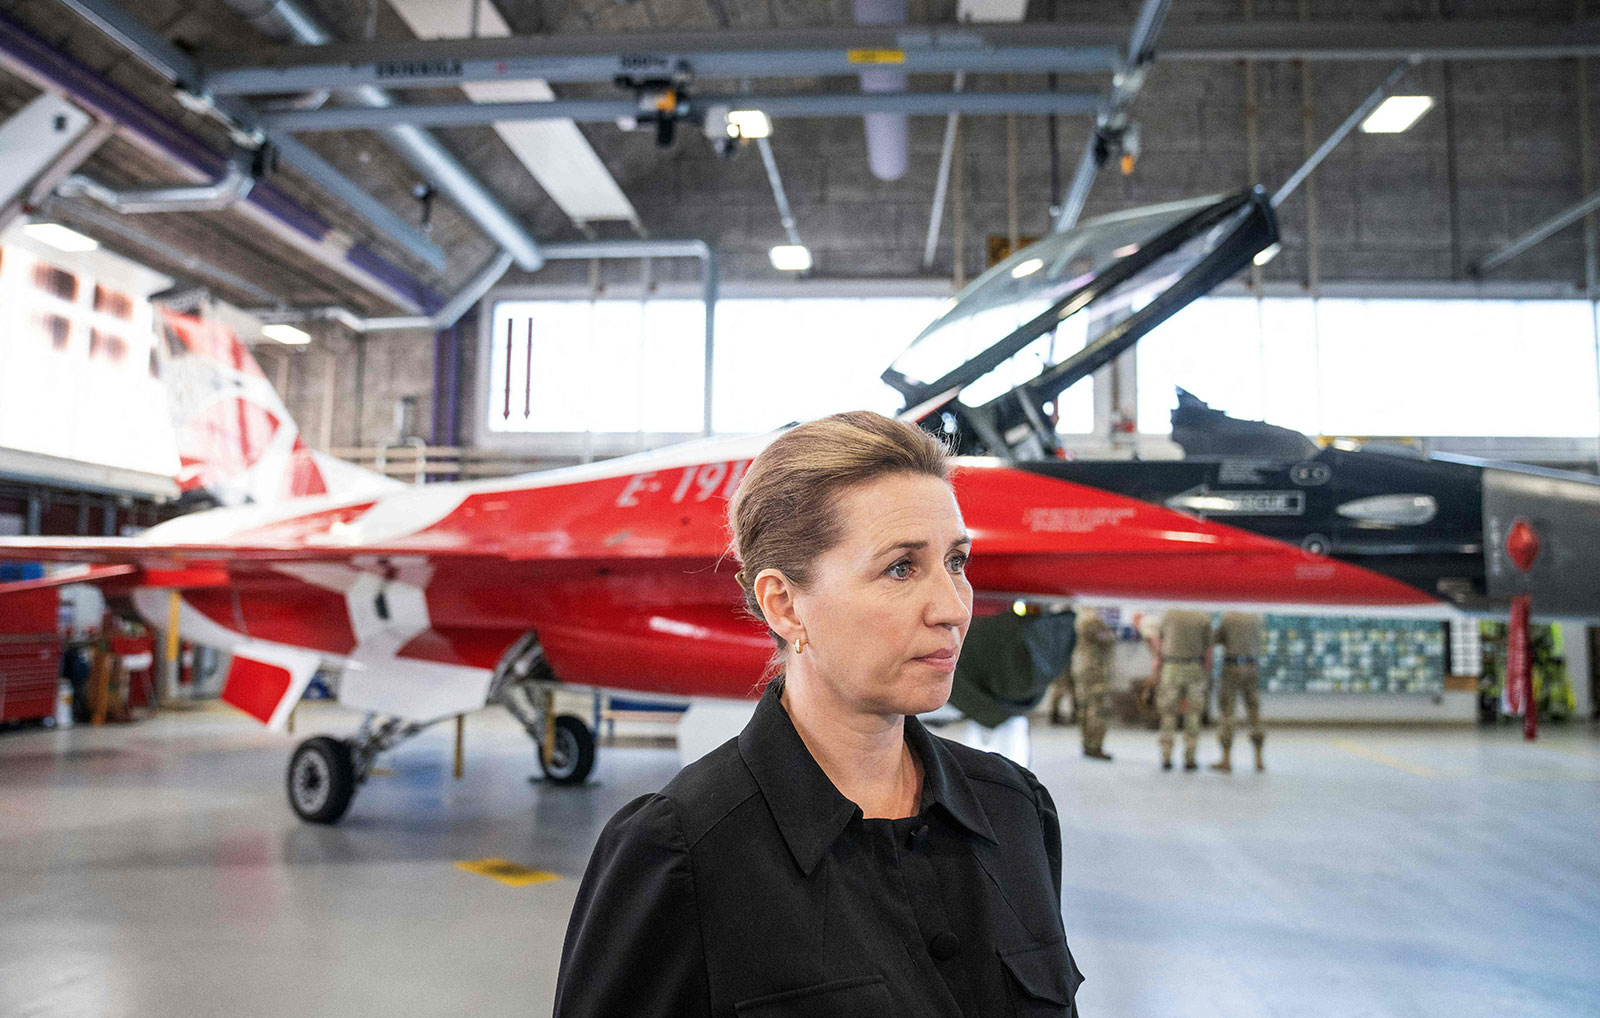 Danish Prime Minister Mette Frederiksen stands in front of an F-16 fighter jet in the colors of the Danish flag as she visits the Fighter Wing Skrydstrup Air Base near Vojens, Denmark, on May 25.